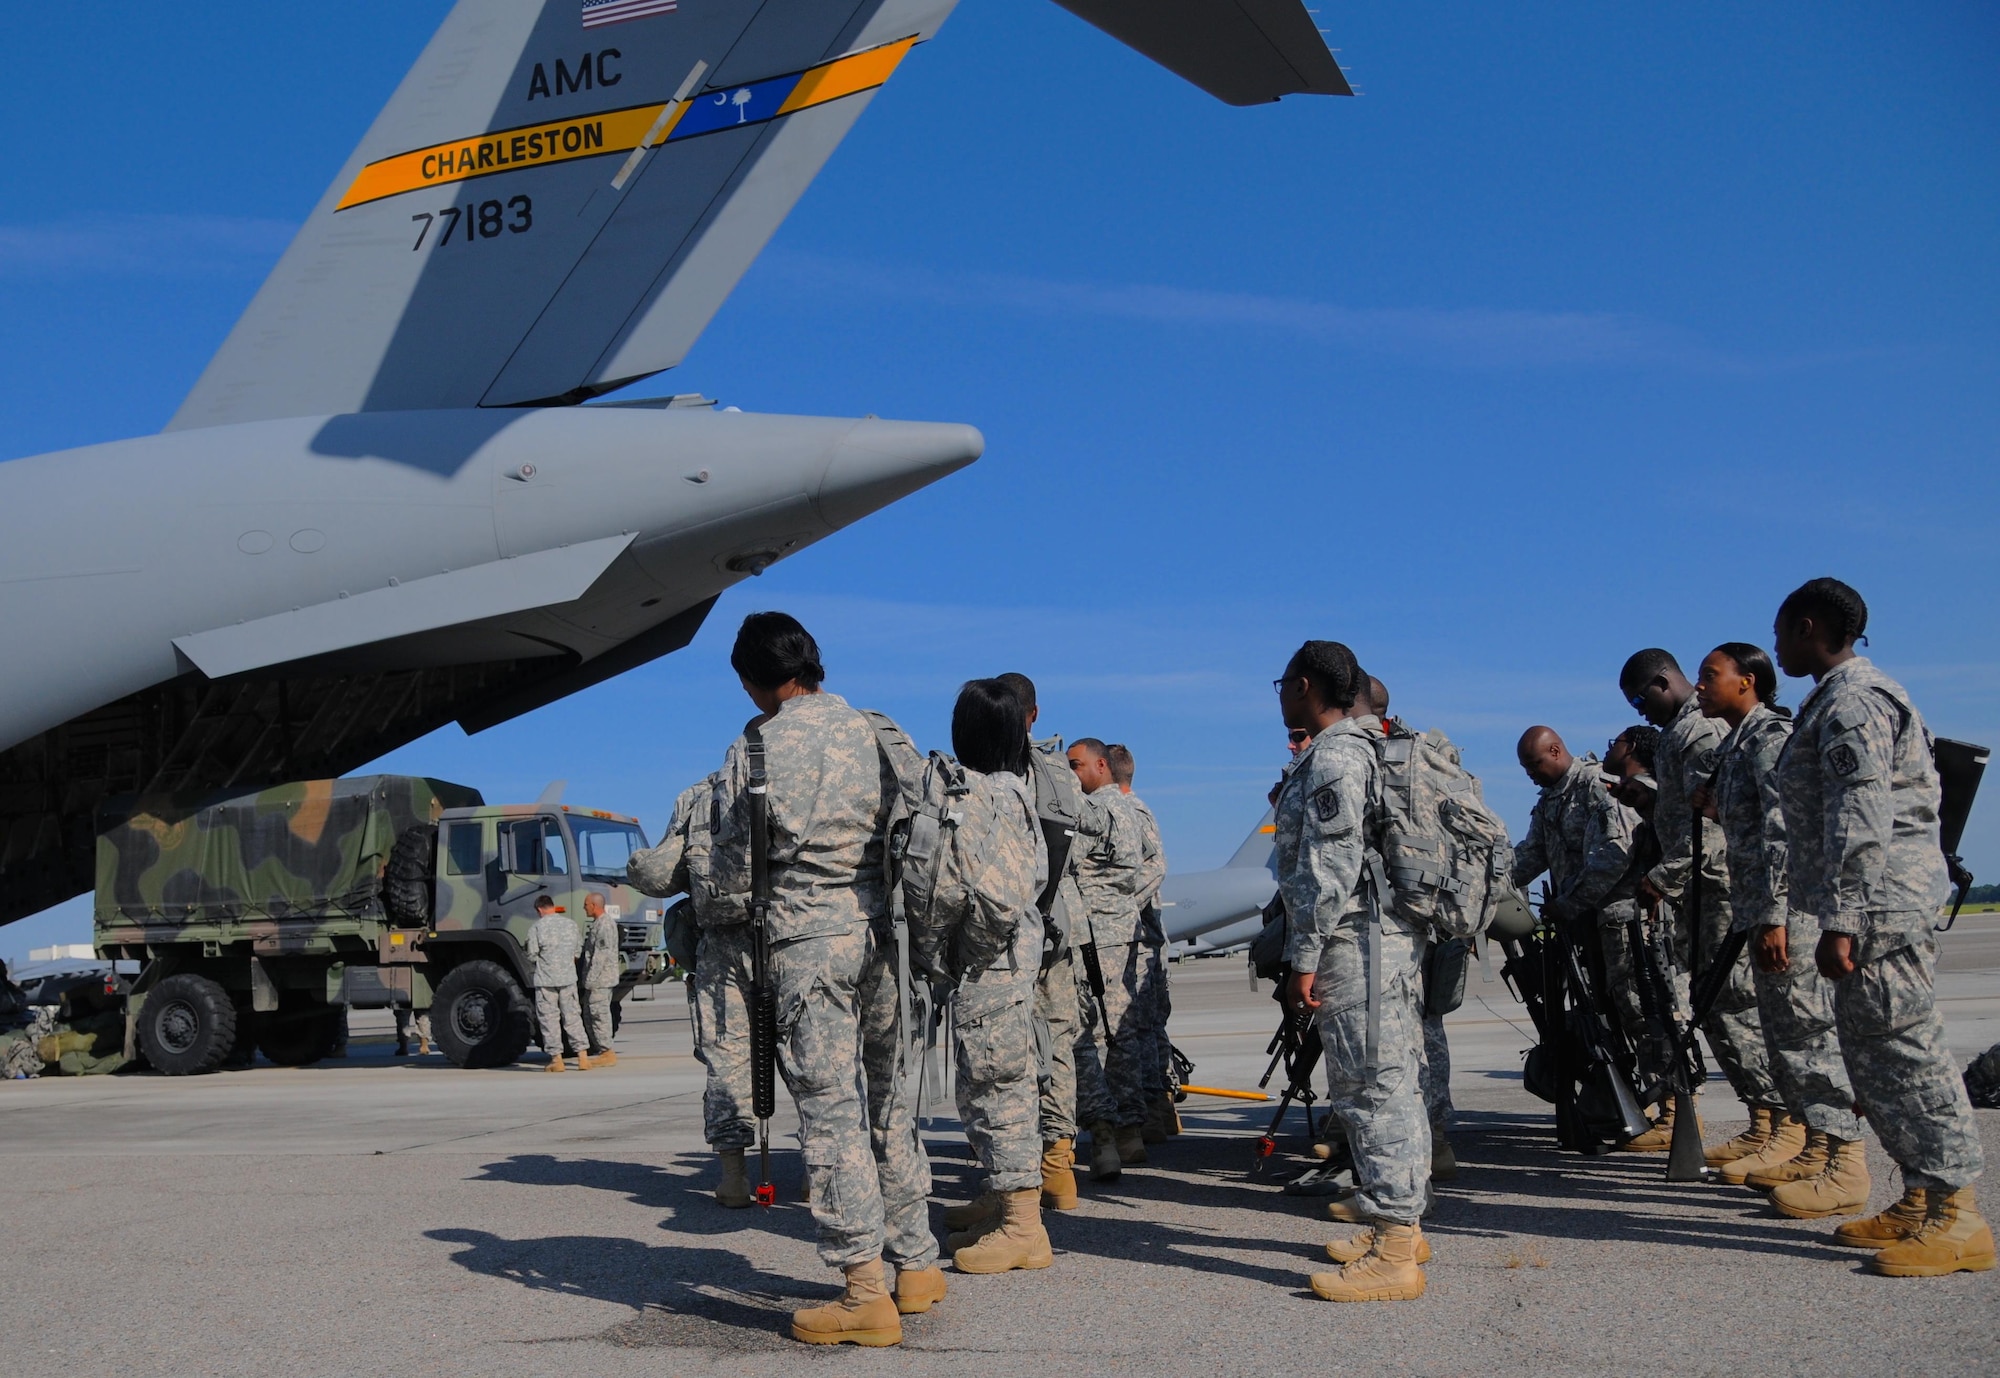 Soldiers of the 414th Chemical Brigade load an Air Force Reserve Boeing C-17 Globe master III of the 315th Air Wing in Charleston, S.C., for transport to Fort McCoy, Wis., Aug. 15, 2015, in support of Operation Red Dragon. Red Dragon is a Civil Defense readiness exercise, which incorporates Army Reserve and National Guard Soldiers with civilian first responder agencies such as fire departments, police departments and hospitals to improve capabilities in large-scale chemical defense operations. (U.S. Army photo by Sgt. Eben Boothby)